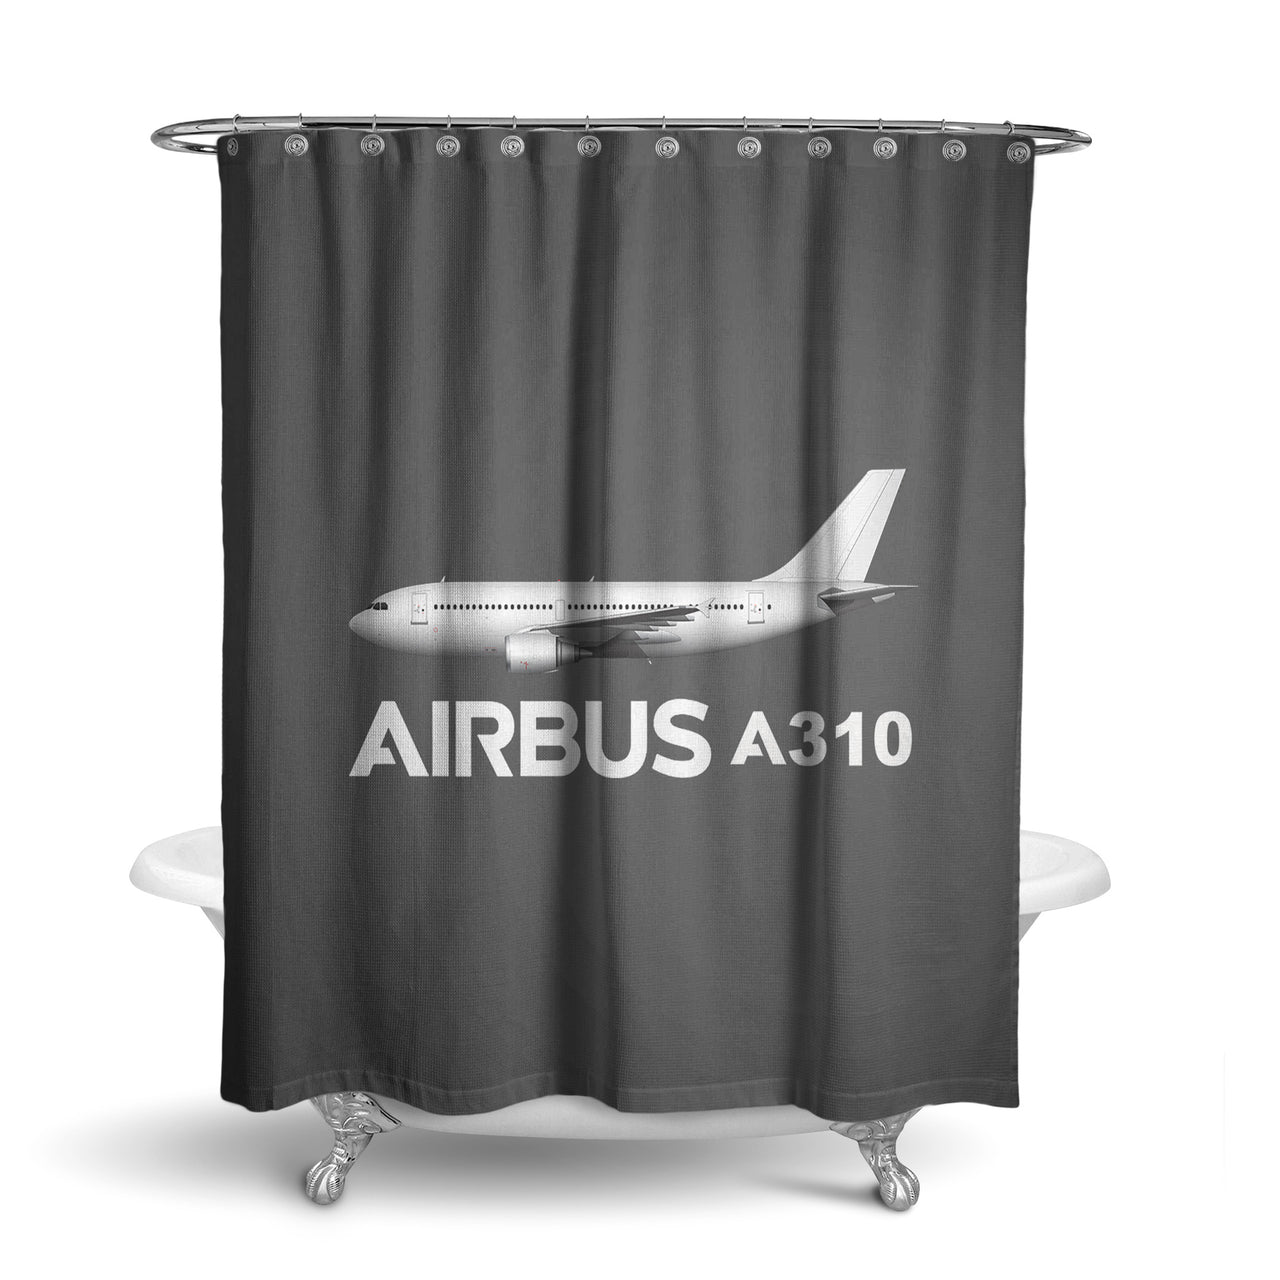 The Airbus A310 Designed Shower Curtains